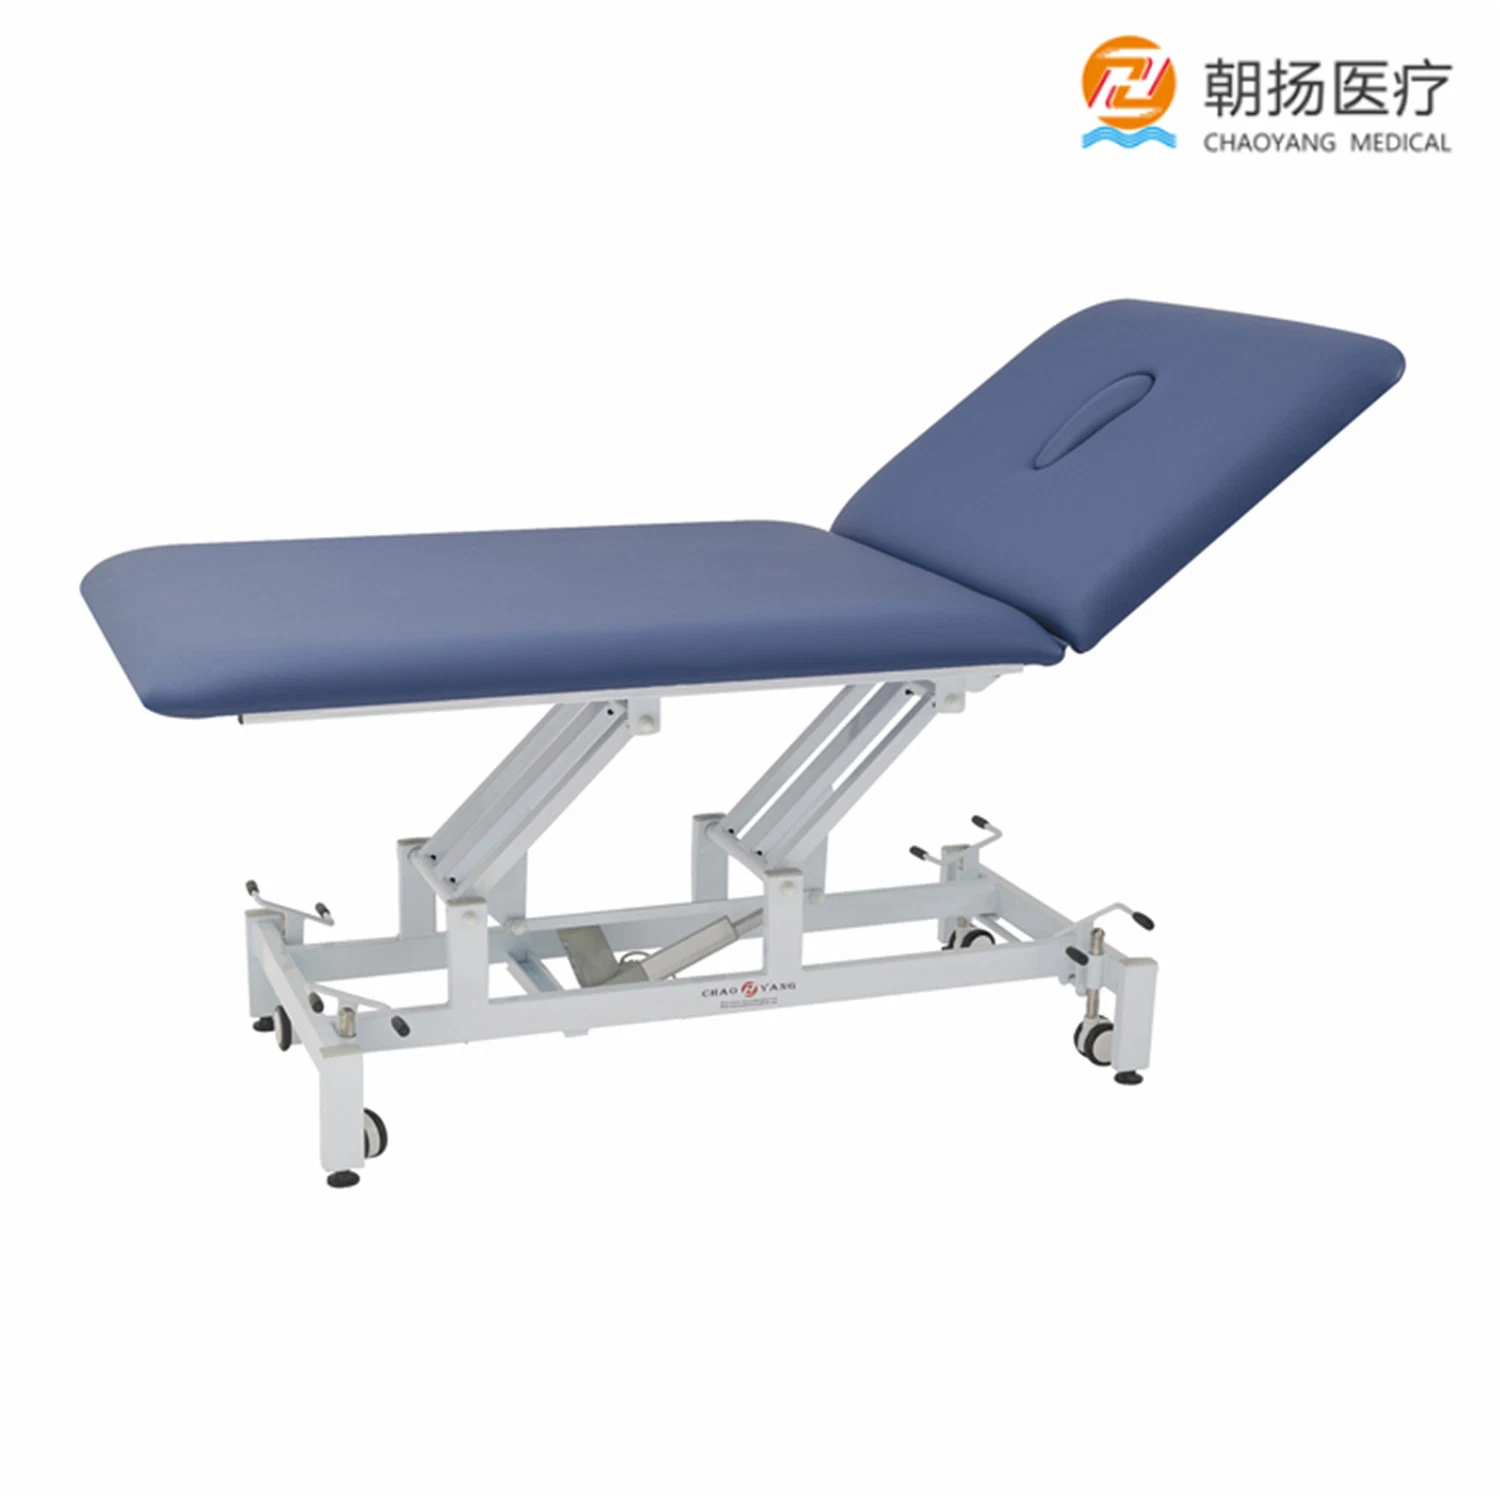 Electric Bobath Hospital Massage Table Bed for Physiotherapy Arm Treatment Table Medical Physiotherapy Bed